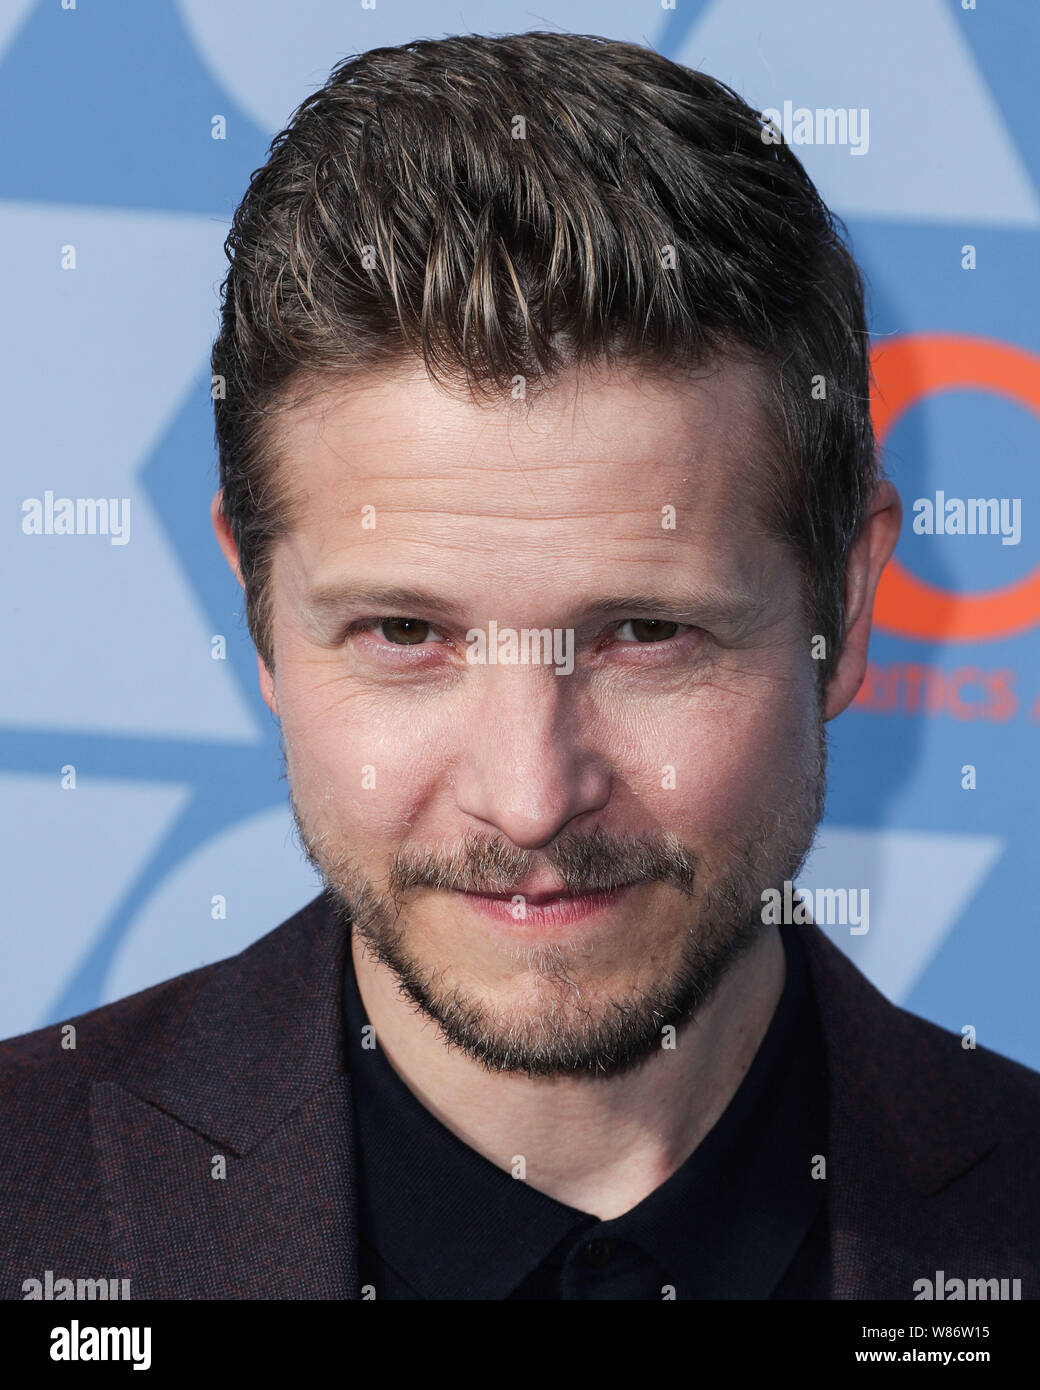 Los Angeles, United States. 07th Aug, 2019. LOS ANGELES, CALIFORNIA, USA -  AUGUST 07: Actor Matt Czuchry arrives at the FOX Summer TCA 2019 All-Star  Party held at Fox Studios on August